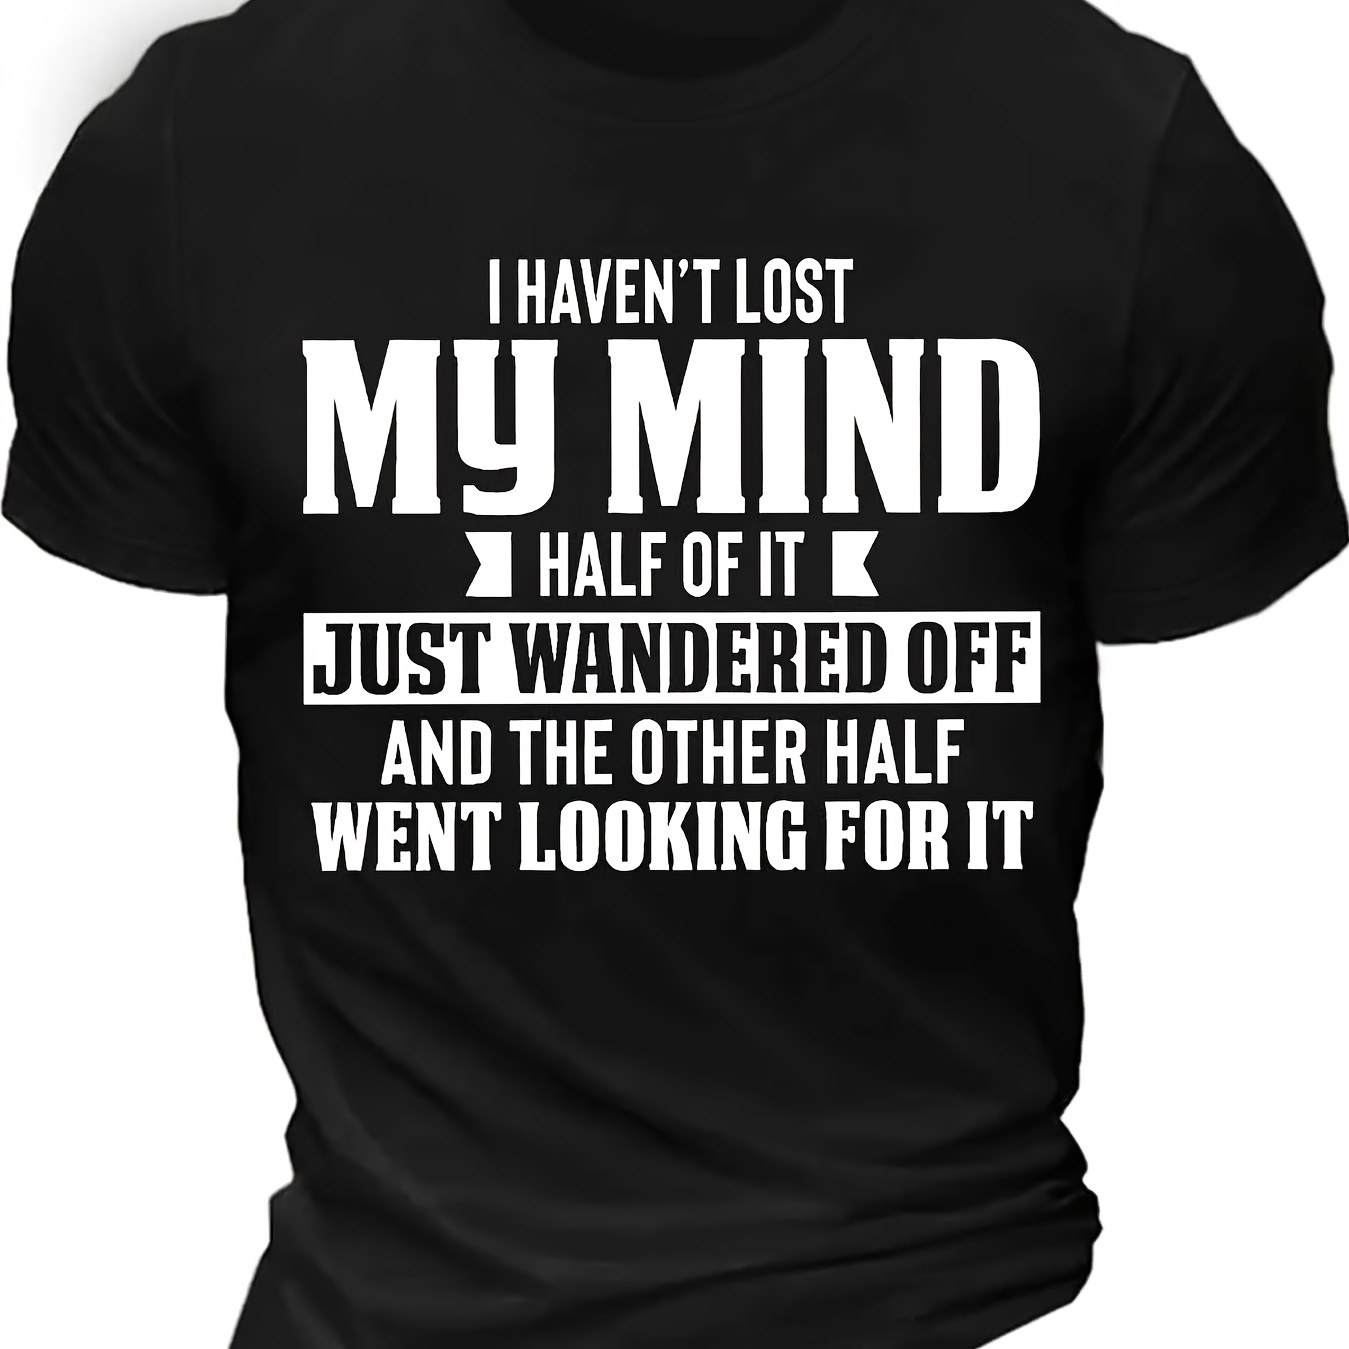 

I Haven't Lost My Mind Print, Men's Fit T-shirt, Leisurely Comfy Tees For Summer, Men's Clothing Tops For Daily Activities